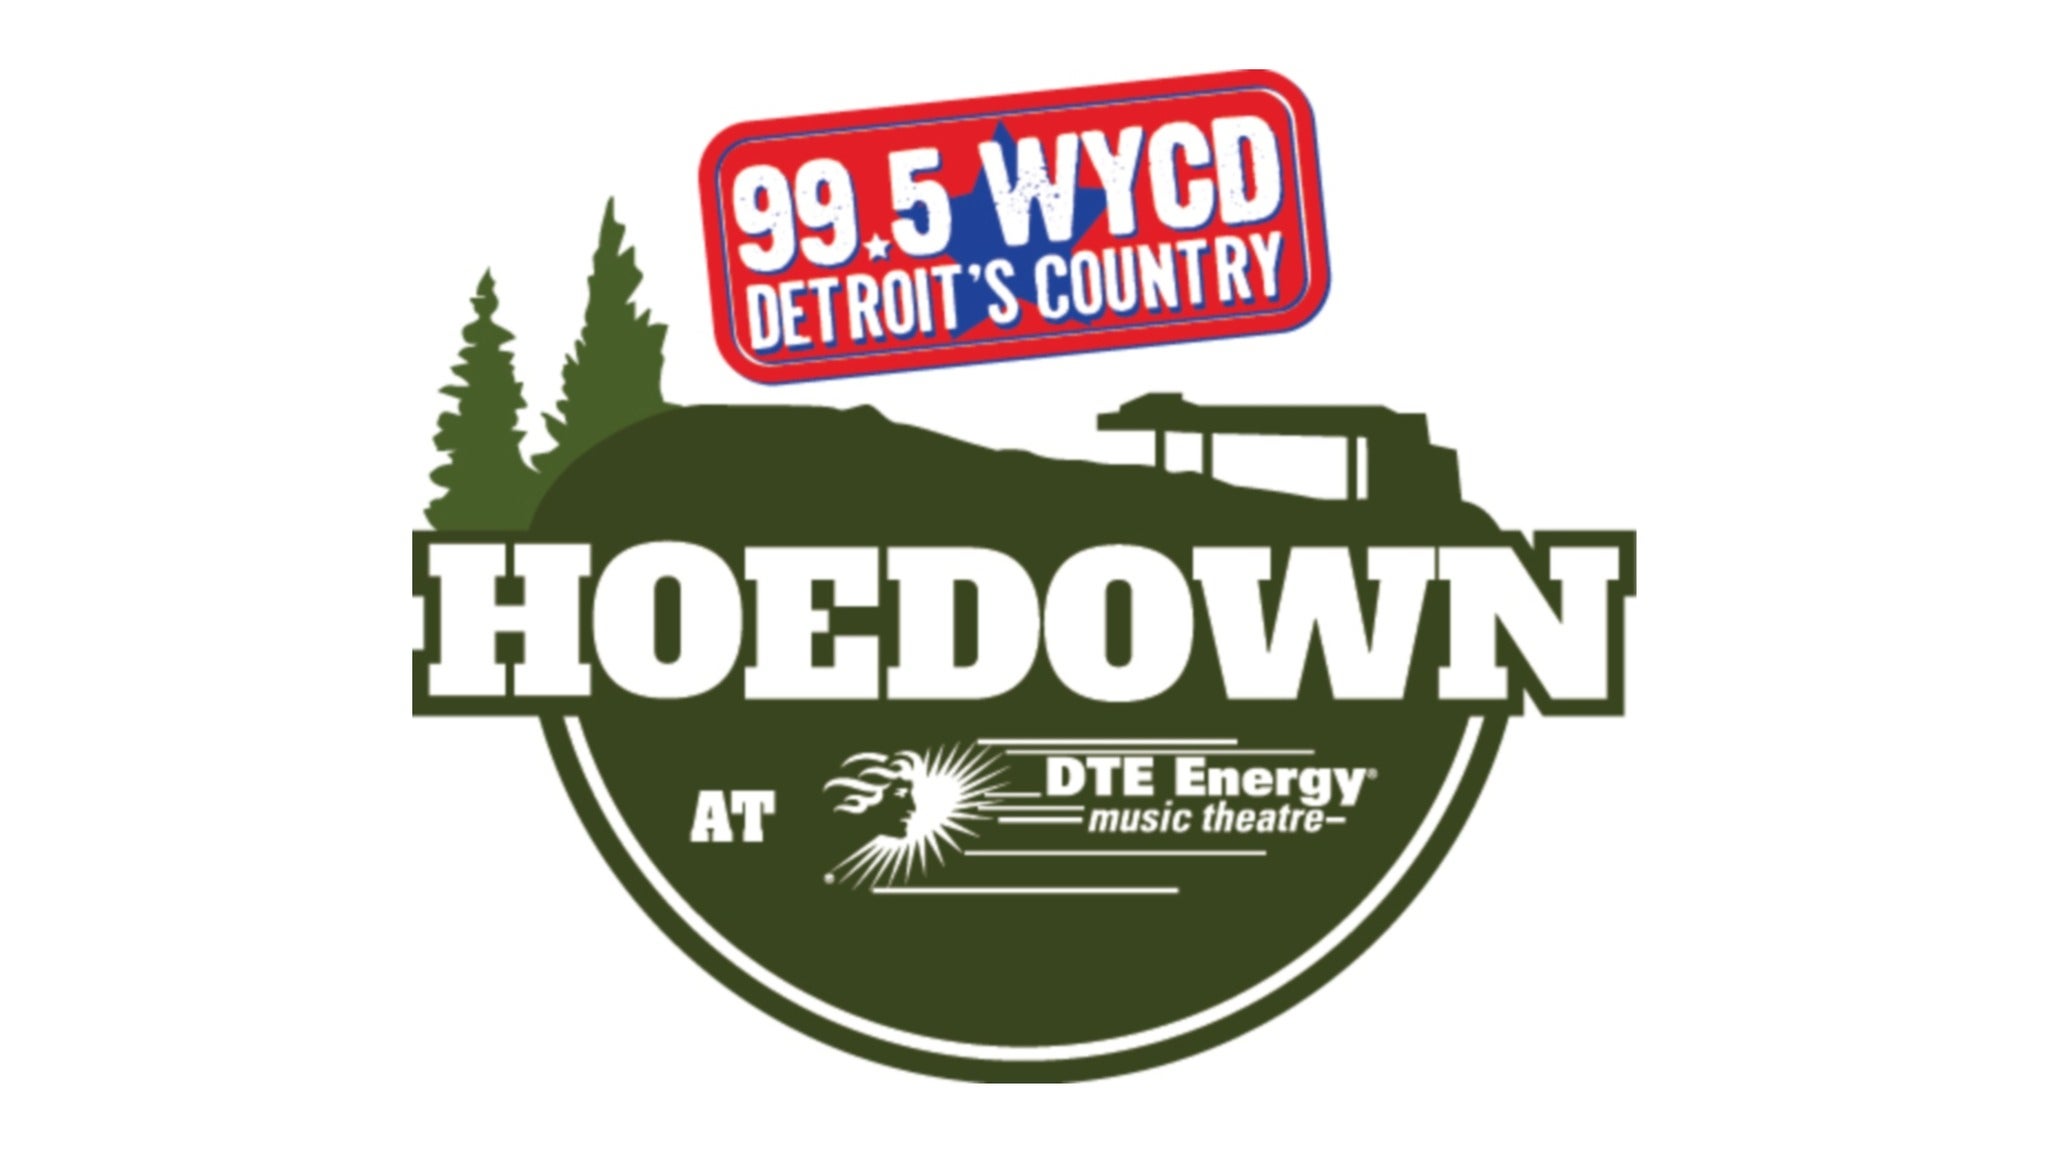 99.5 WYCD Hoedown Featuring Lady A in Clarkston promo photo for Official Platinum Onsale presale offer code